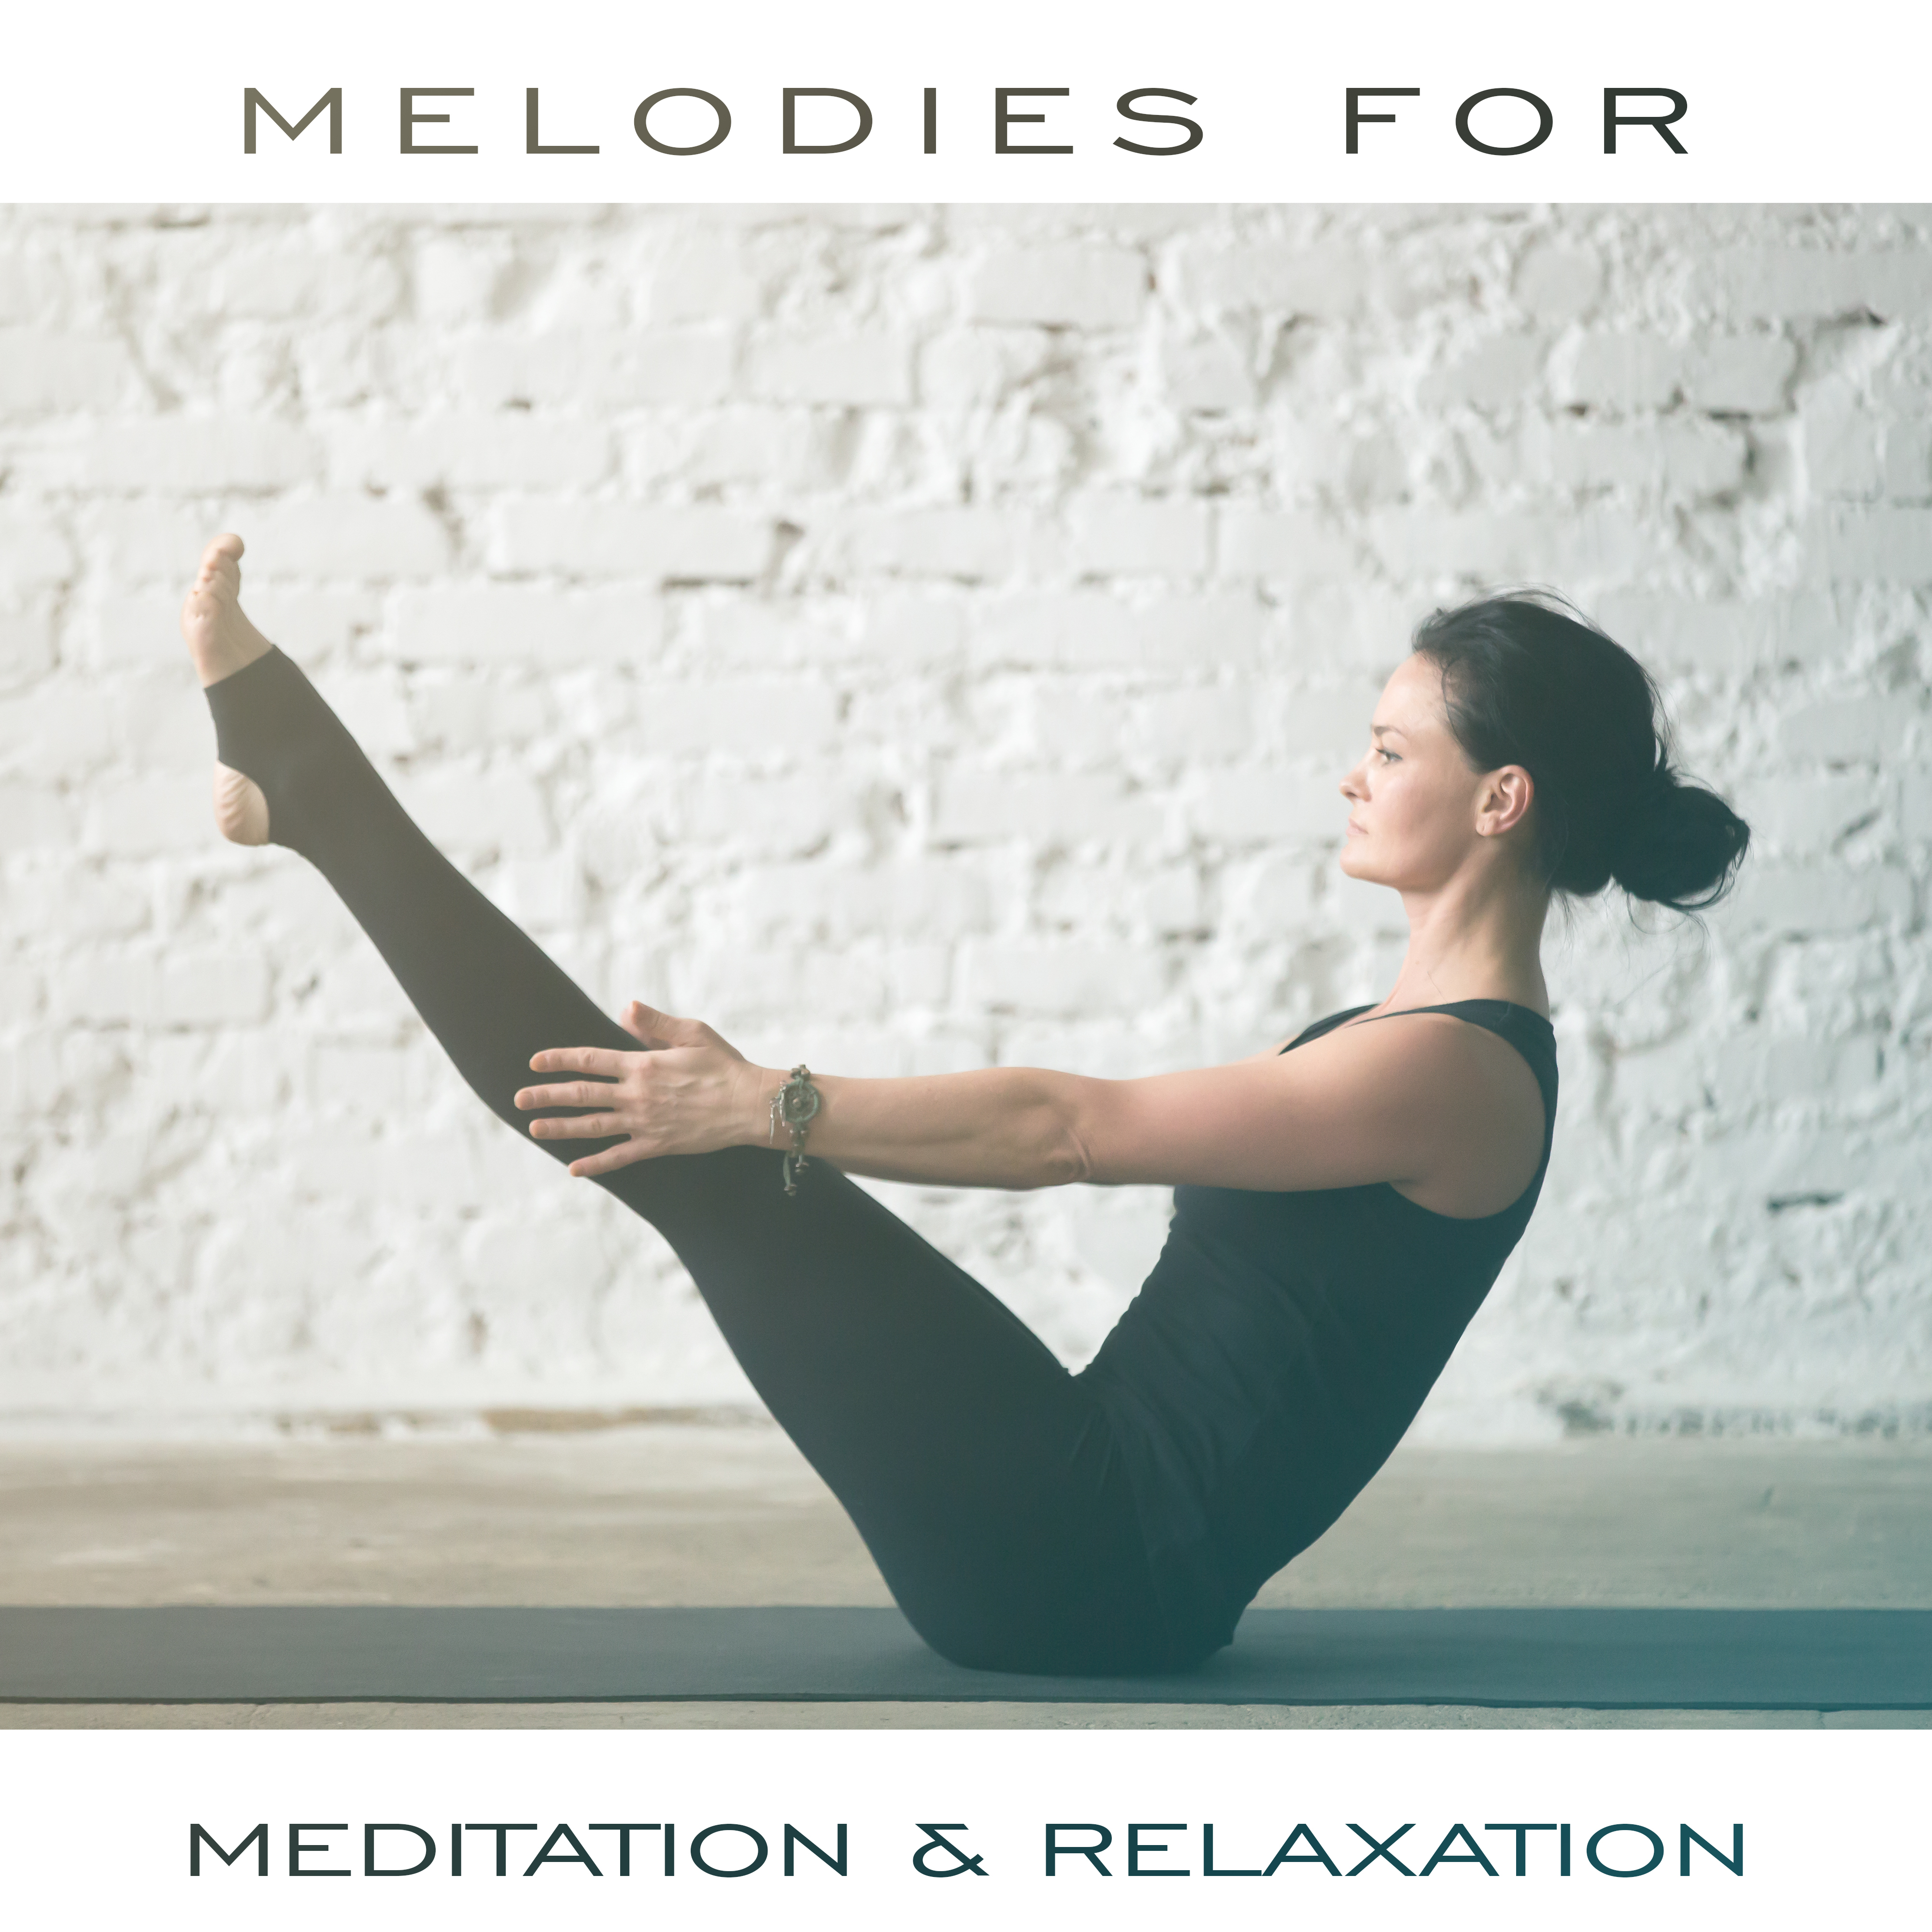 Melodies for Meditation & Relaxation